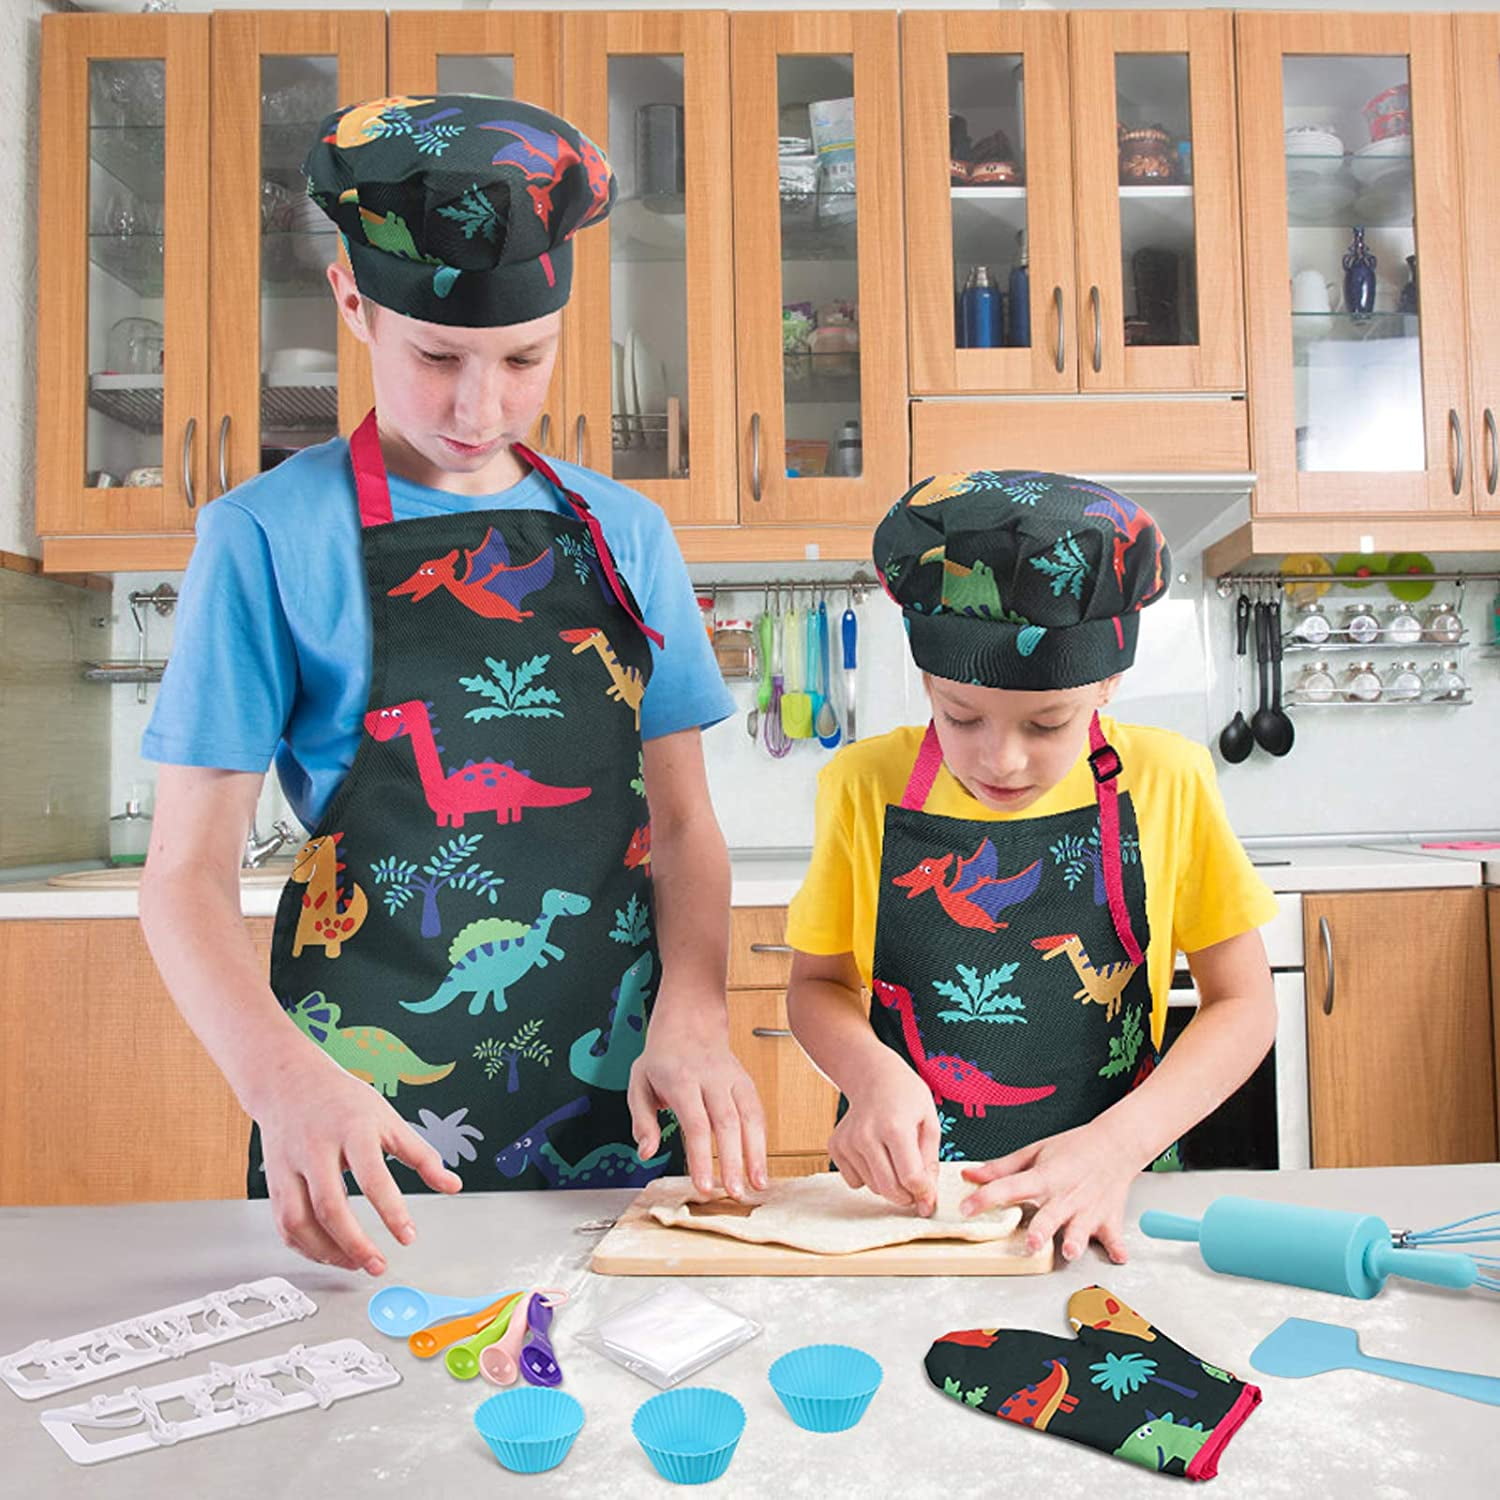 Unisex Kid Girl Boy Kitchen Apron Chef Hat Outfit Cooking Baking Painting Sets 